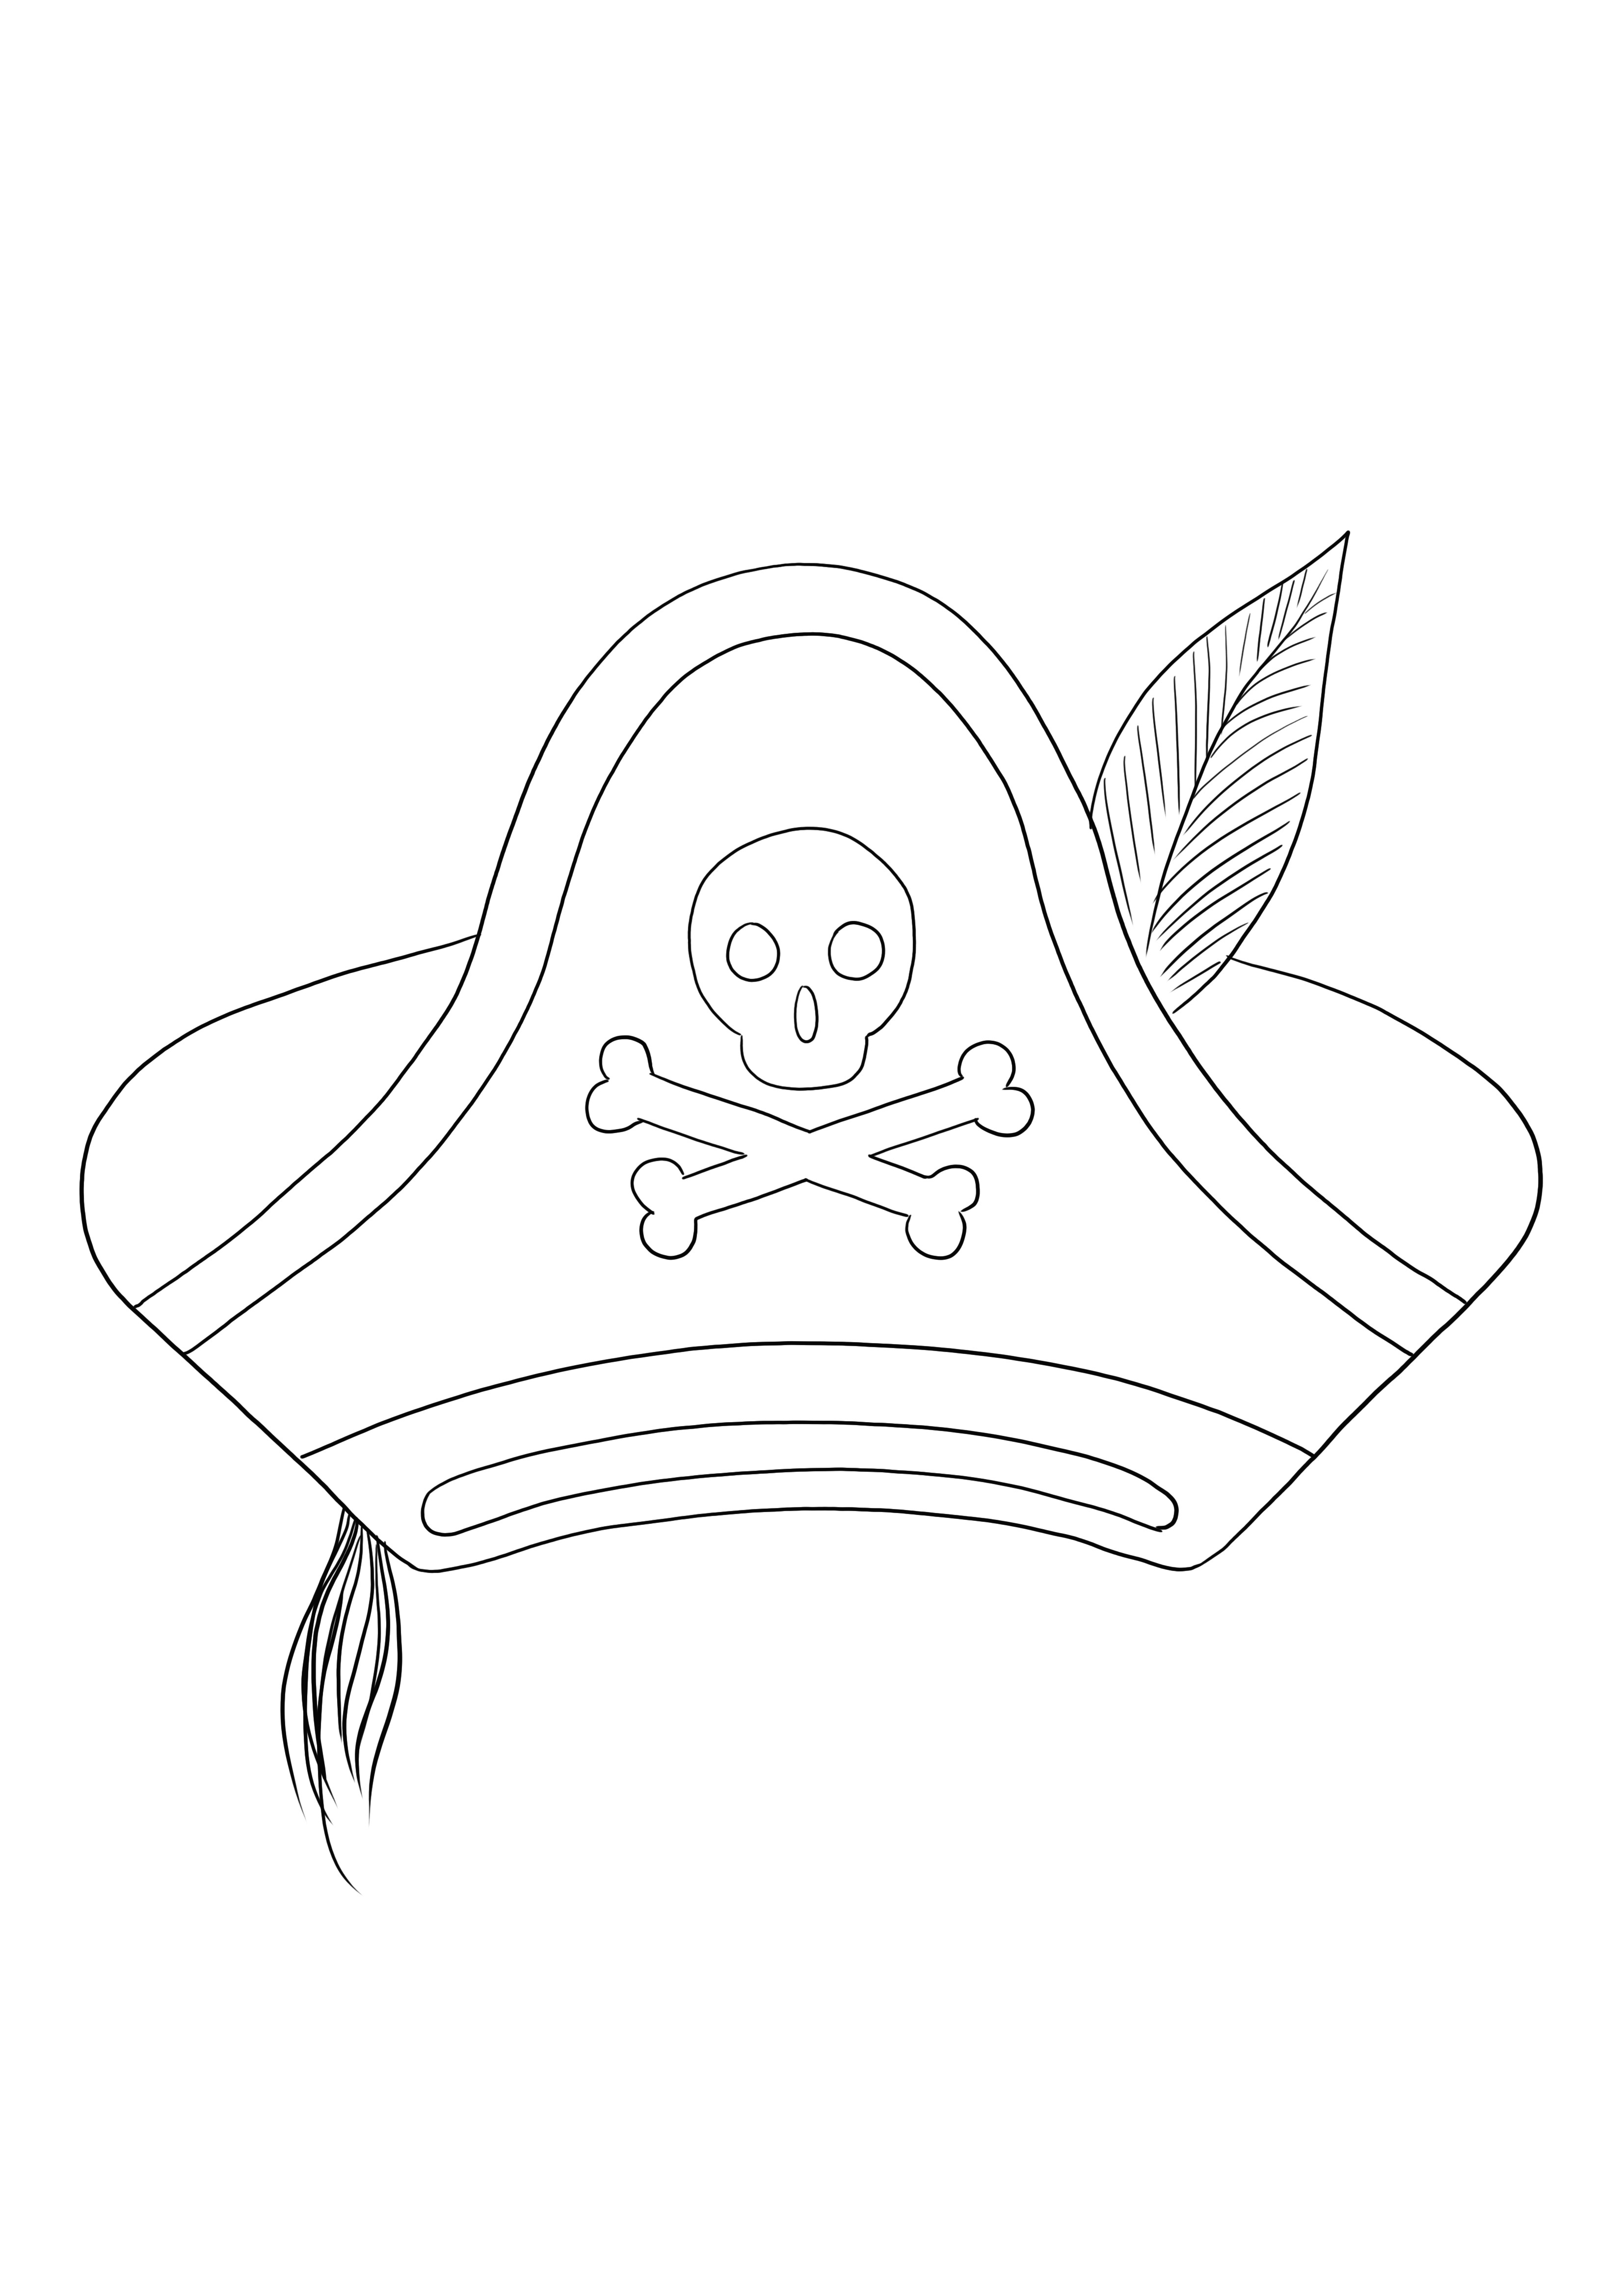 Free downloading or printing of a coloring pirate hat picture for kids